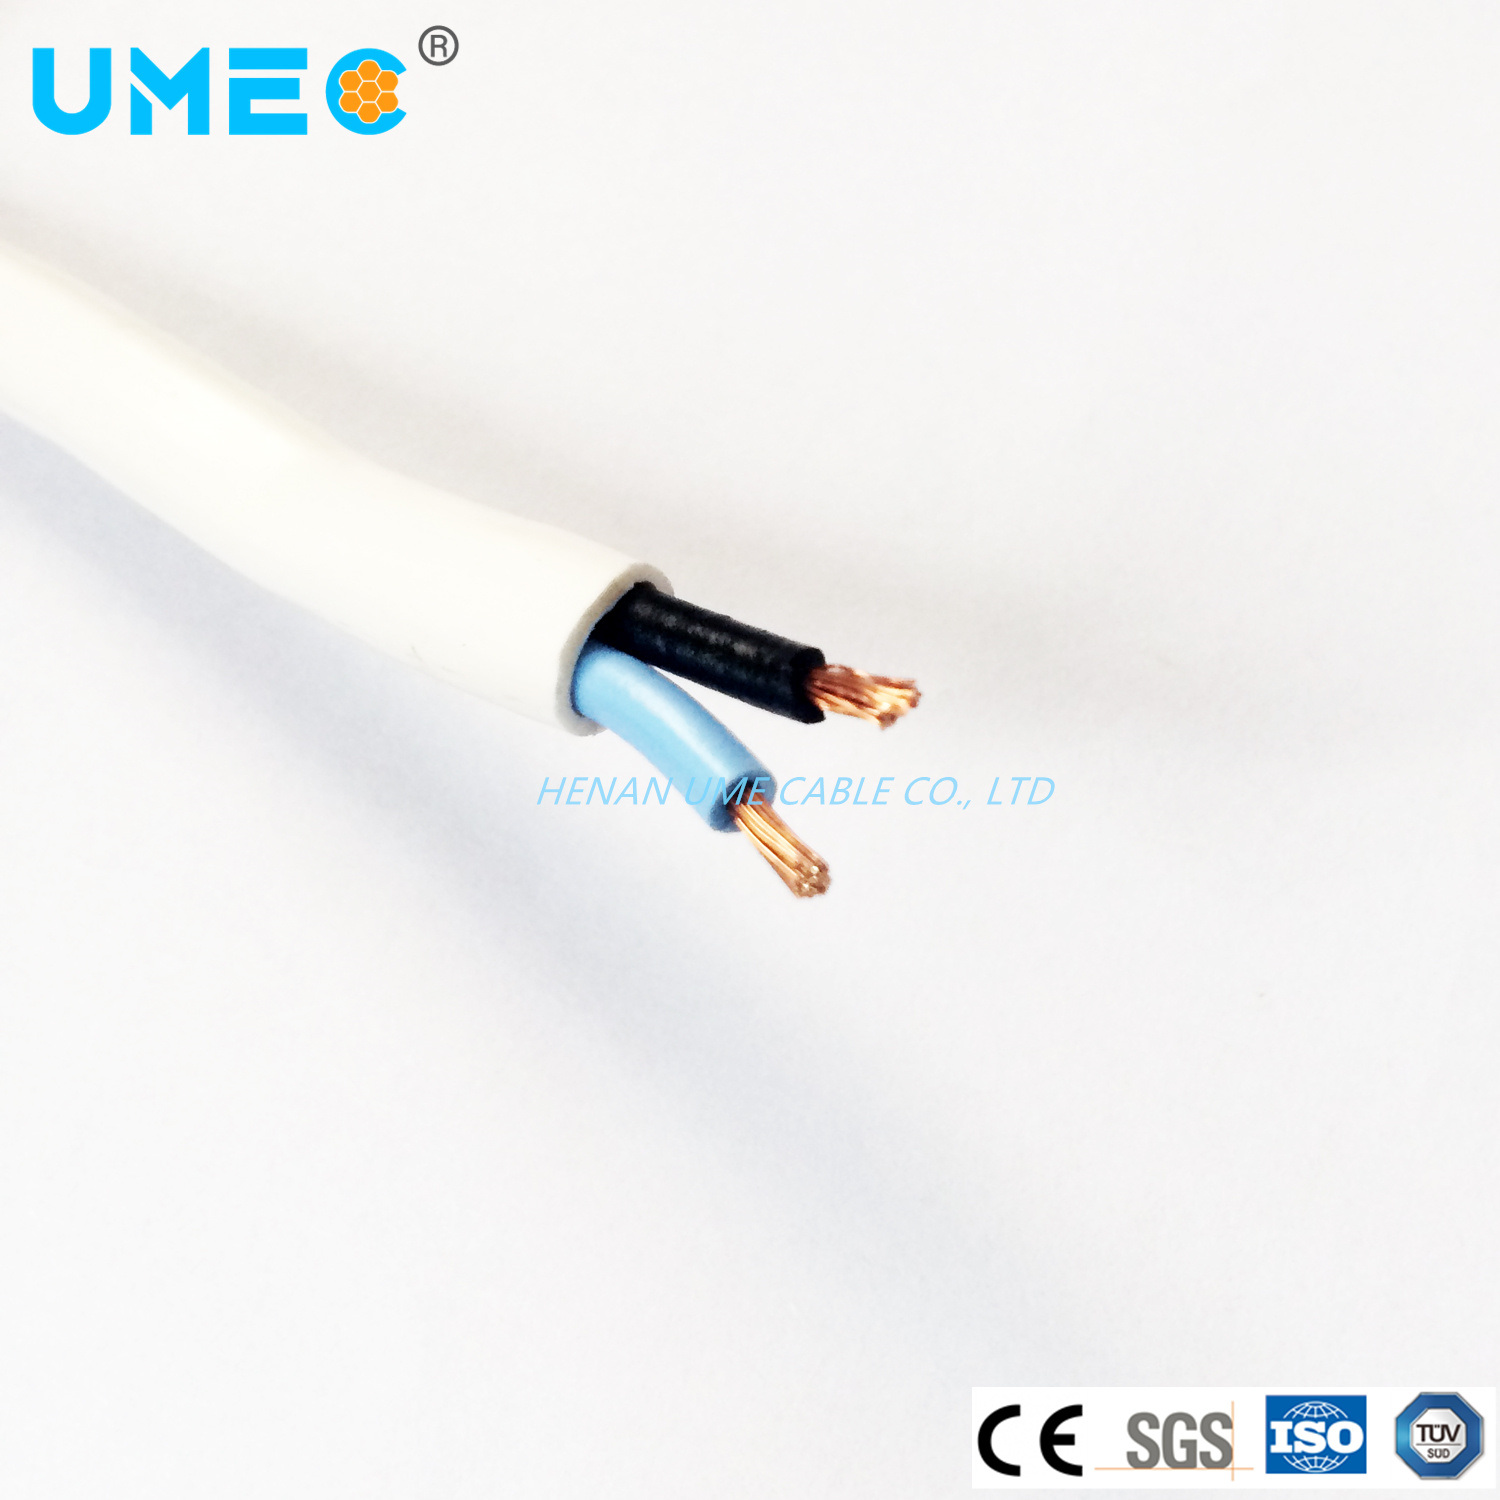 Wholesale Cable Wire High-Quality Well-Known Brand Factory IEC Cable H03vvh2-F 0.75*2core 1.5mm2*2c